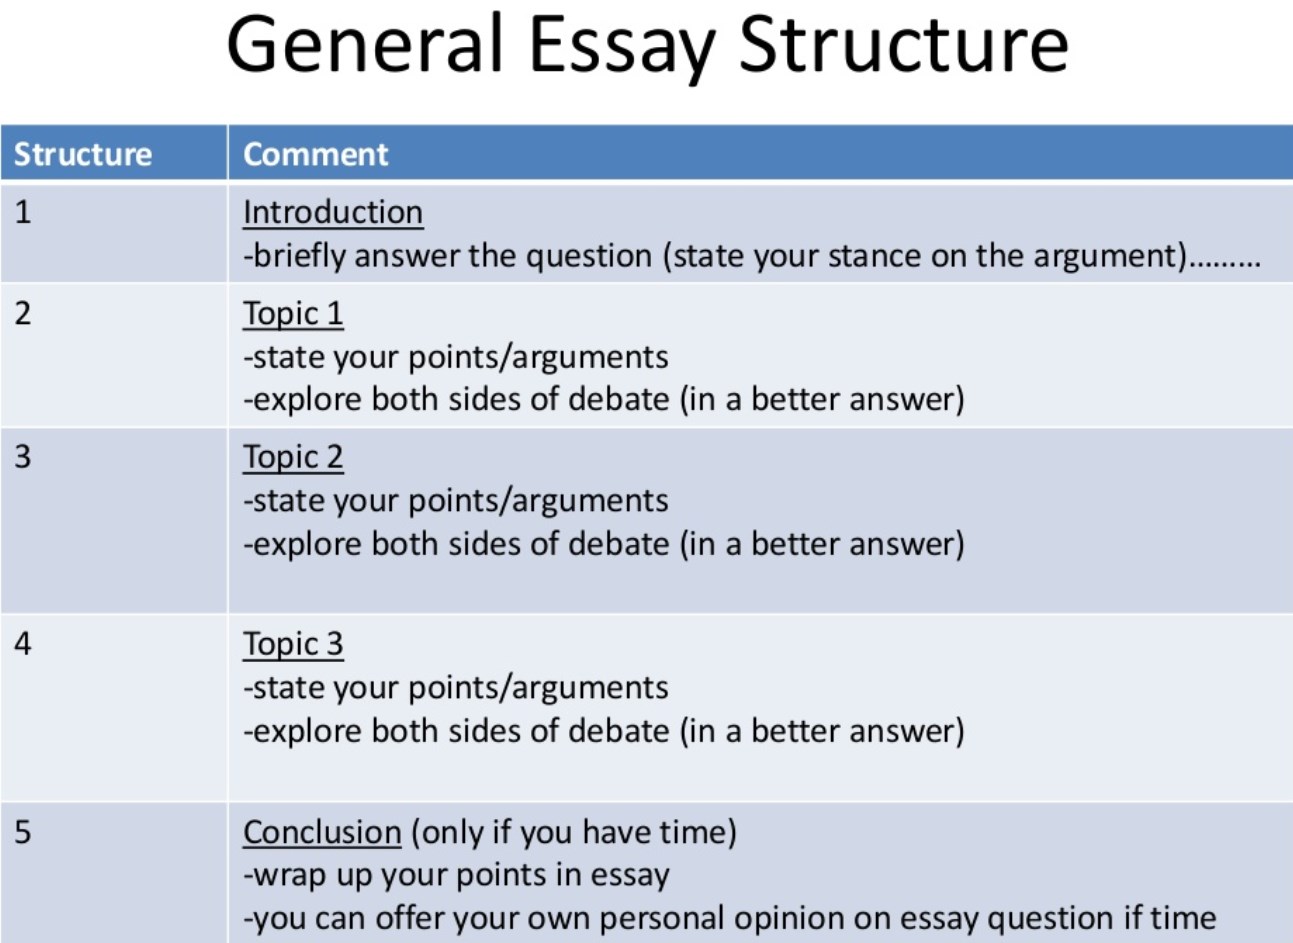 Product opinion. Essay structure. Структура эссе IELTS. Структура эссе writing. Структура эссе по IELTS.